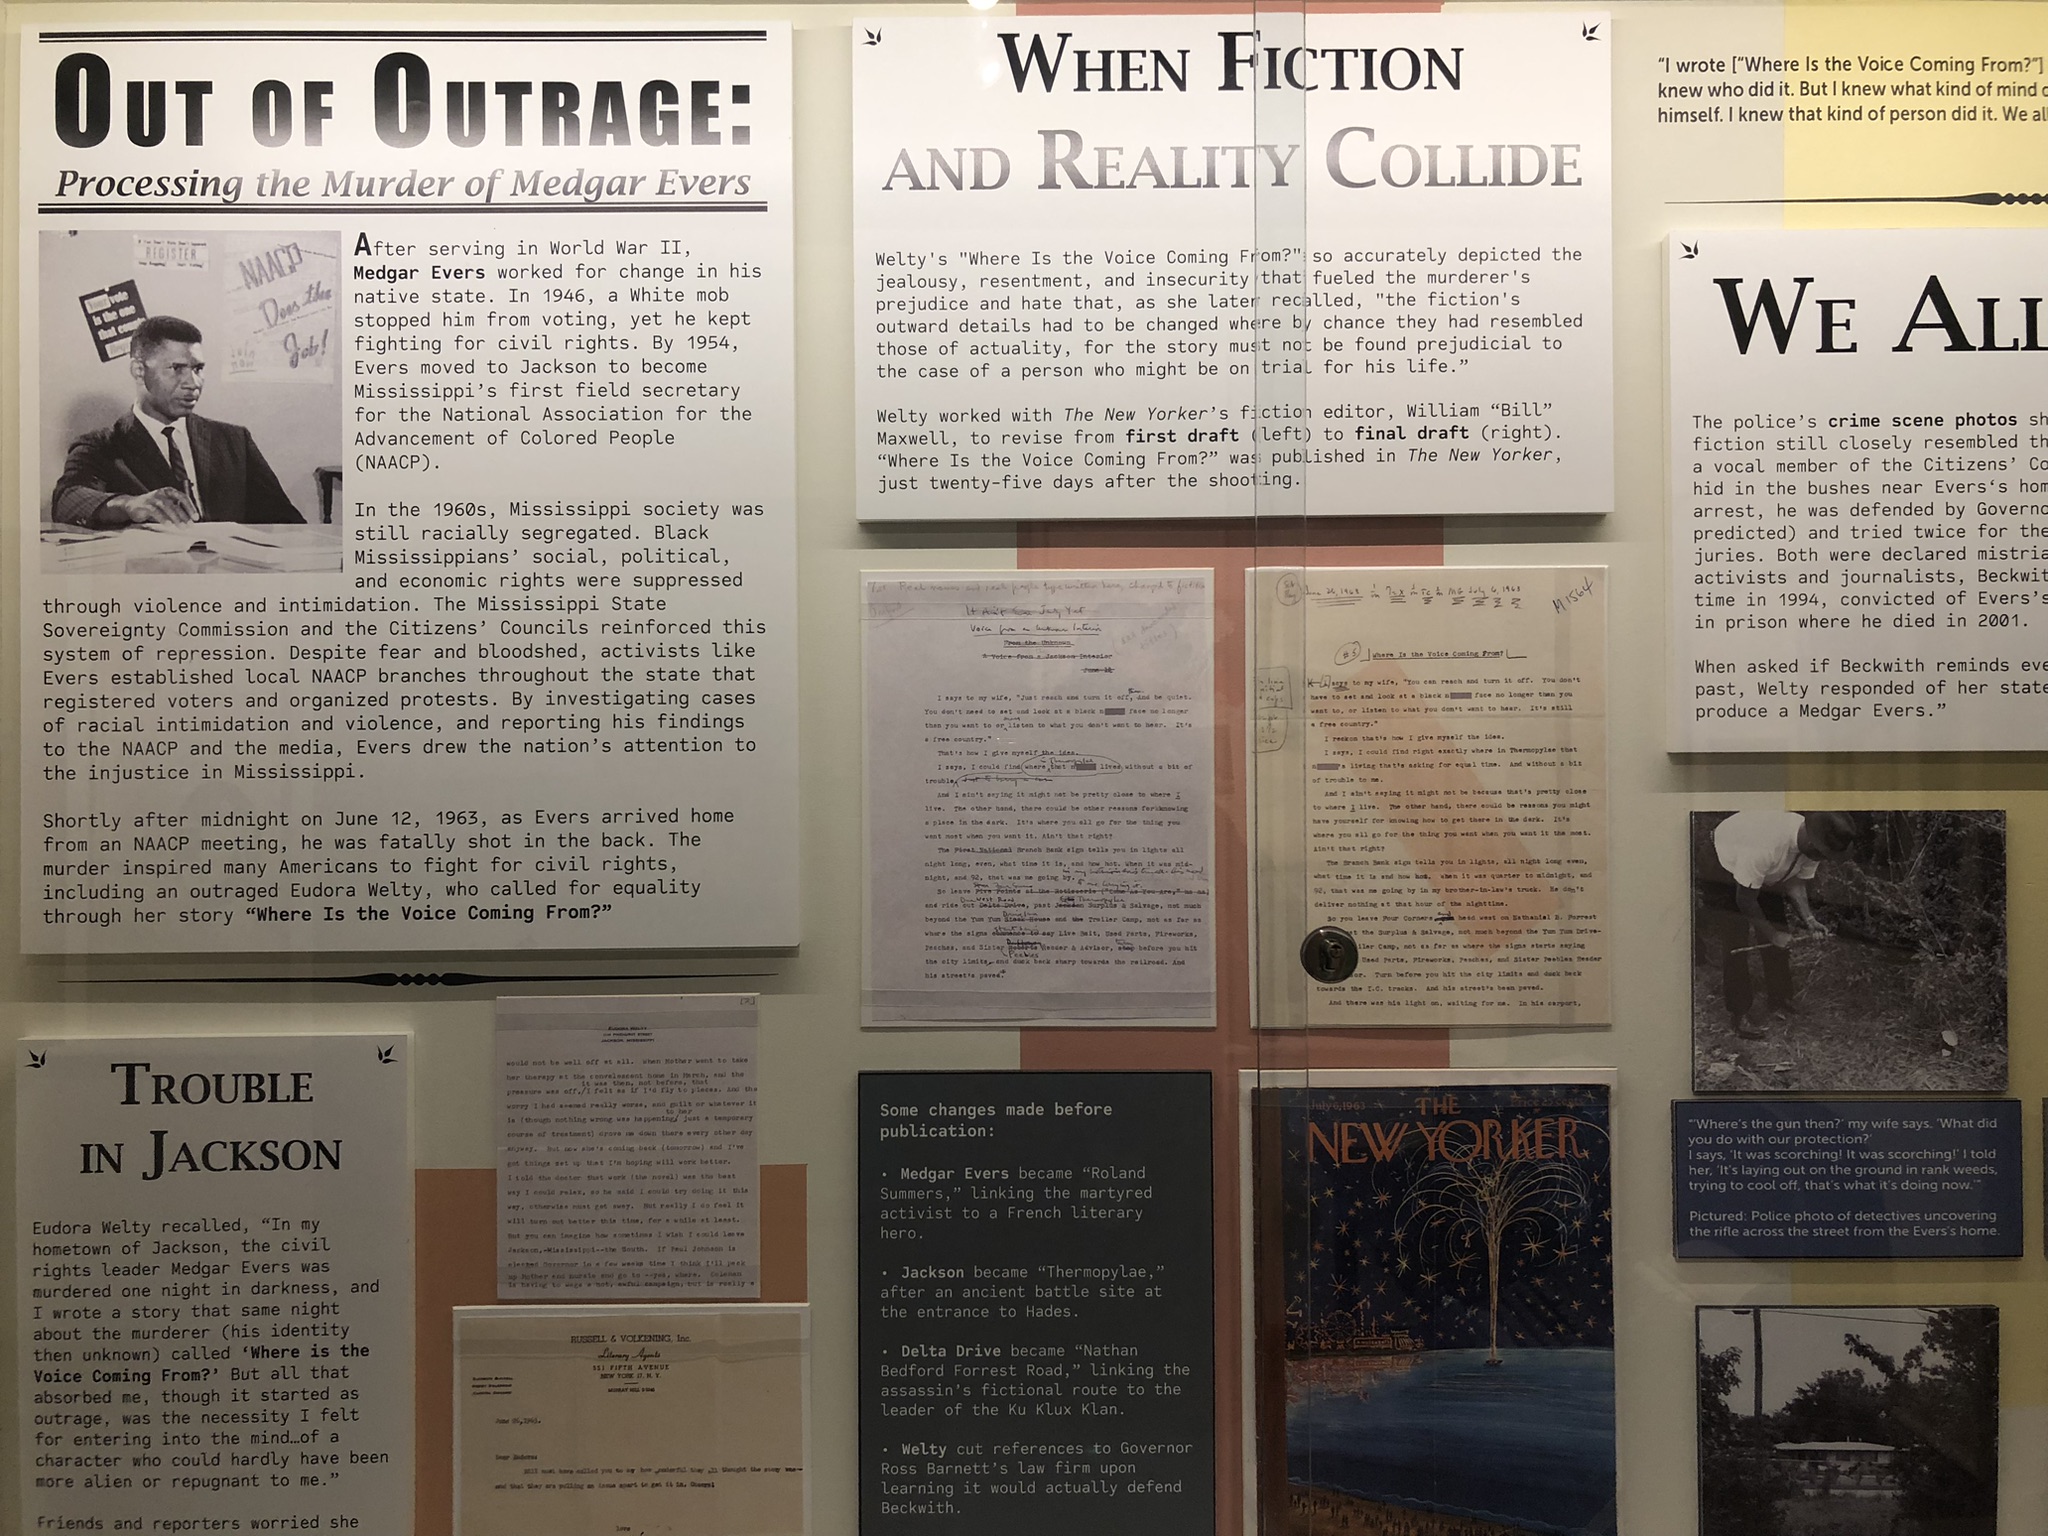 Photograph of Medgar Evers exhibit at Eudora Welty House & Garden featuring text panels and early drafts of Welty's short story Where Is the Voice Coming From?